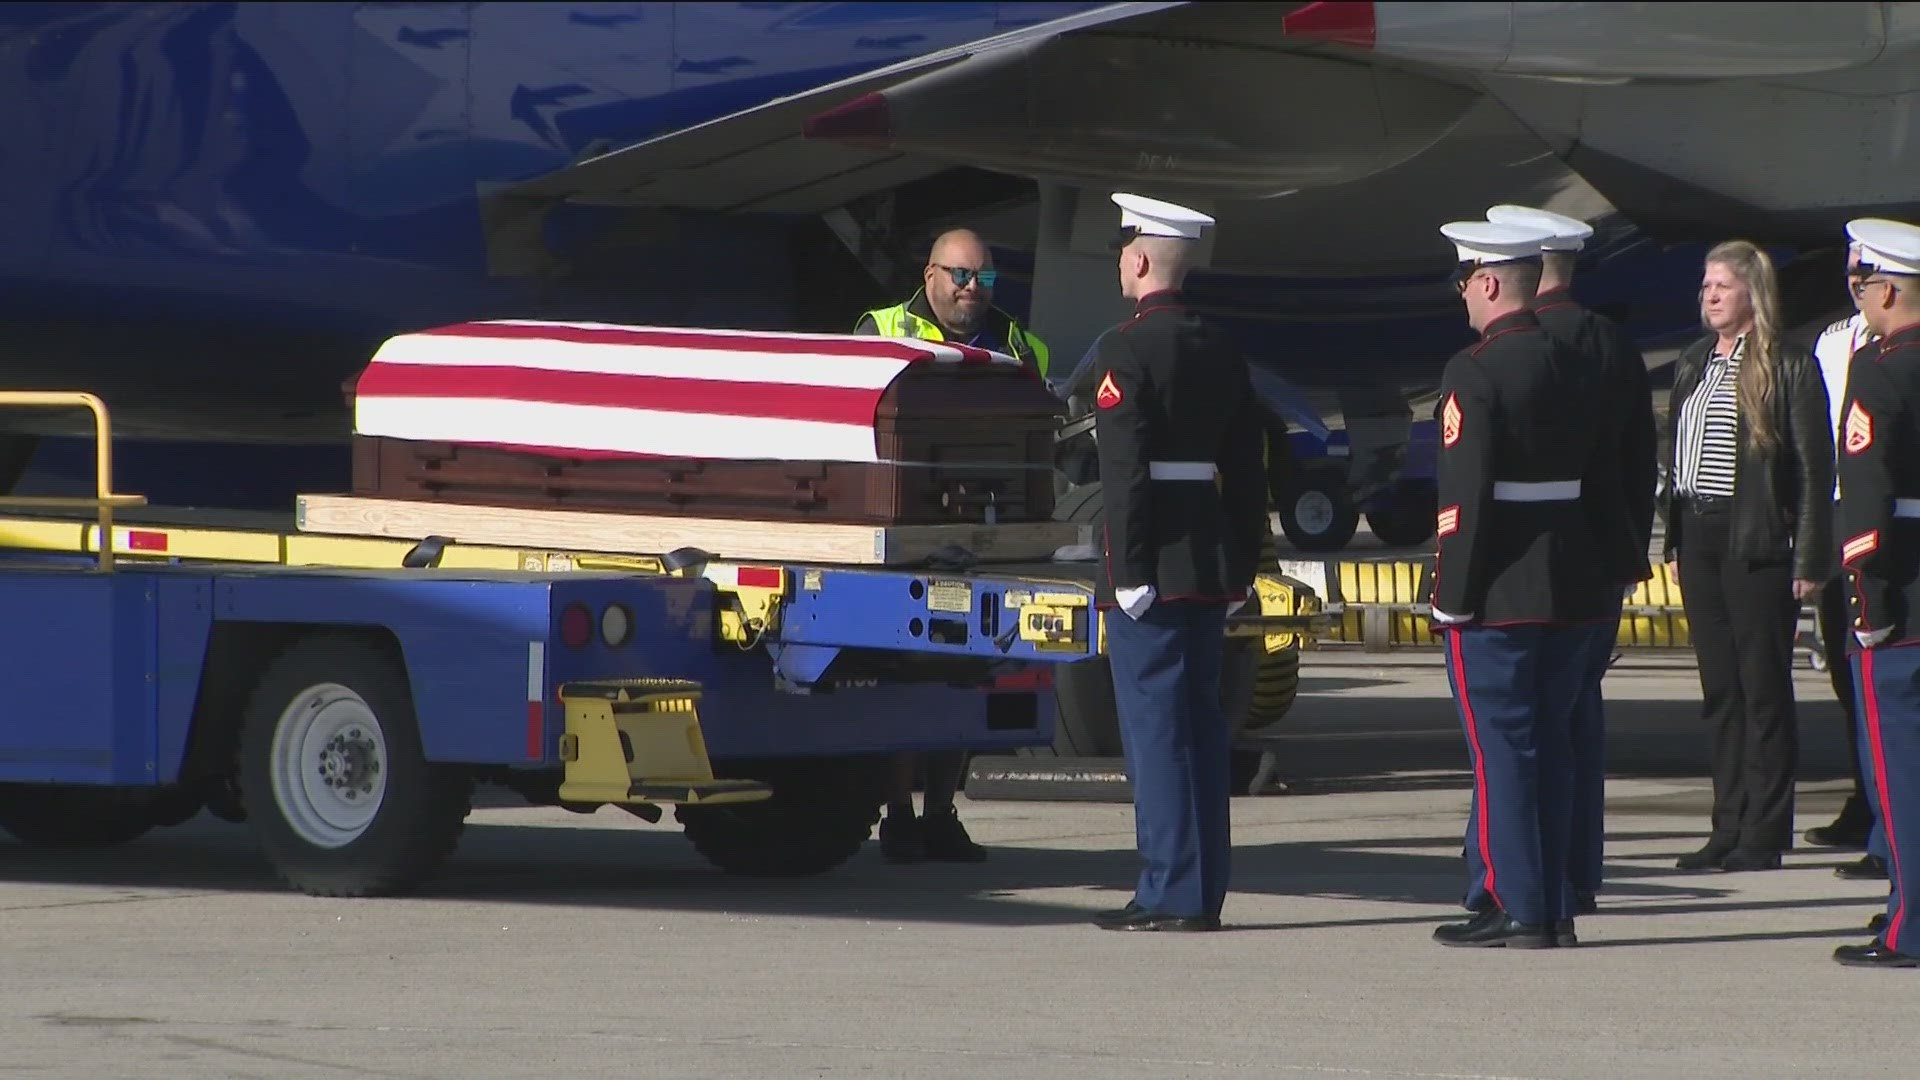 The community is invited to pay respects to the late Marine Capt. Ben Moulton as his body is honorably transferred to his final resting place in Emmett.